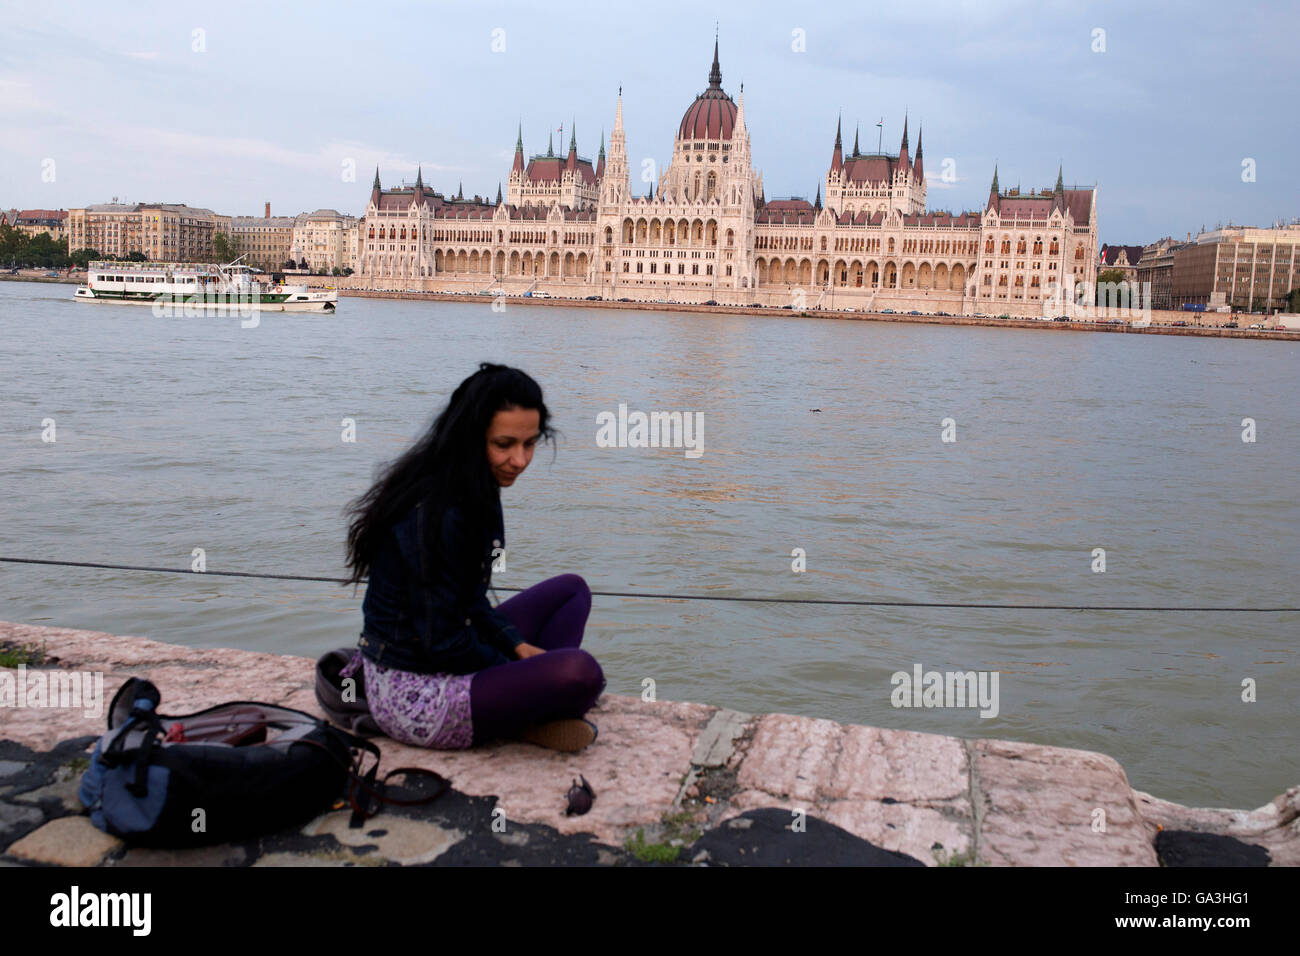 The thinker woman near the Danube (Tuna) River and the Hungarian Parliament Building. Stock Photo